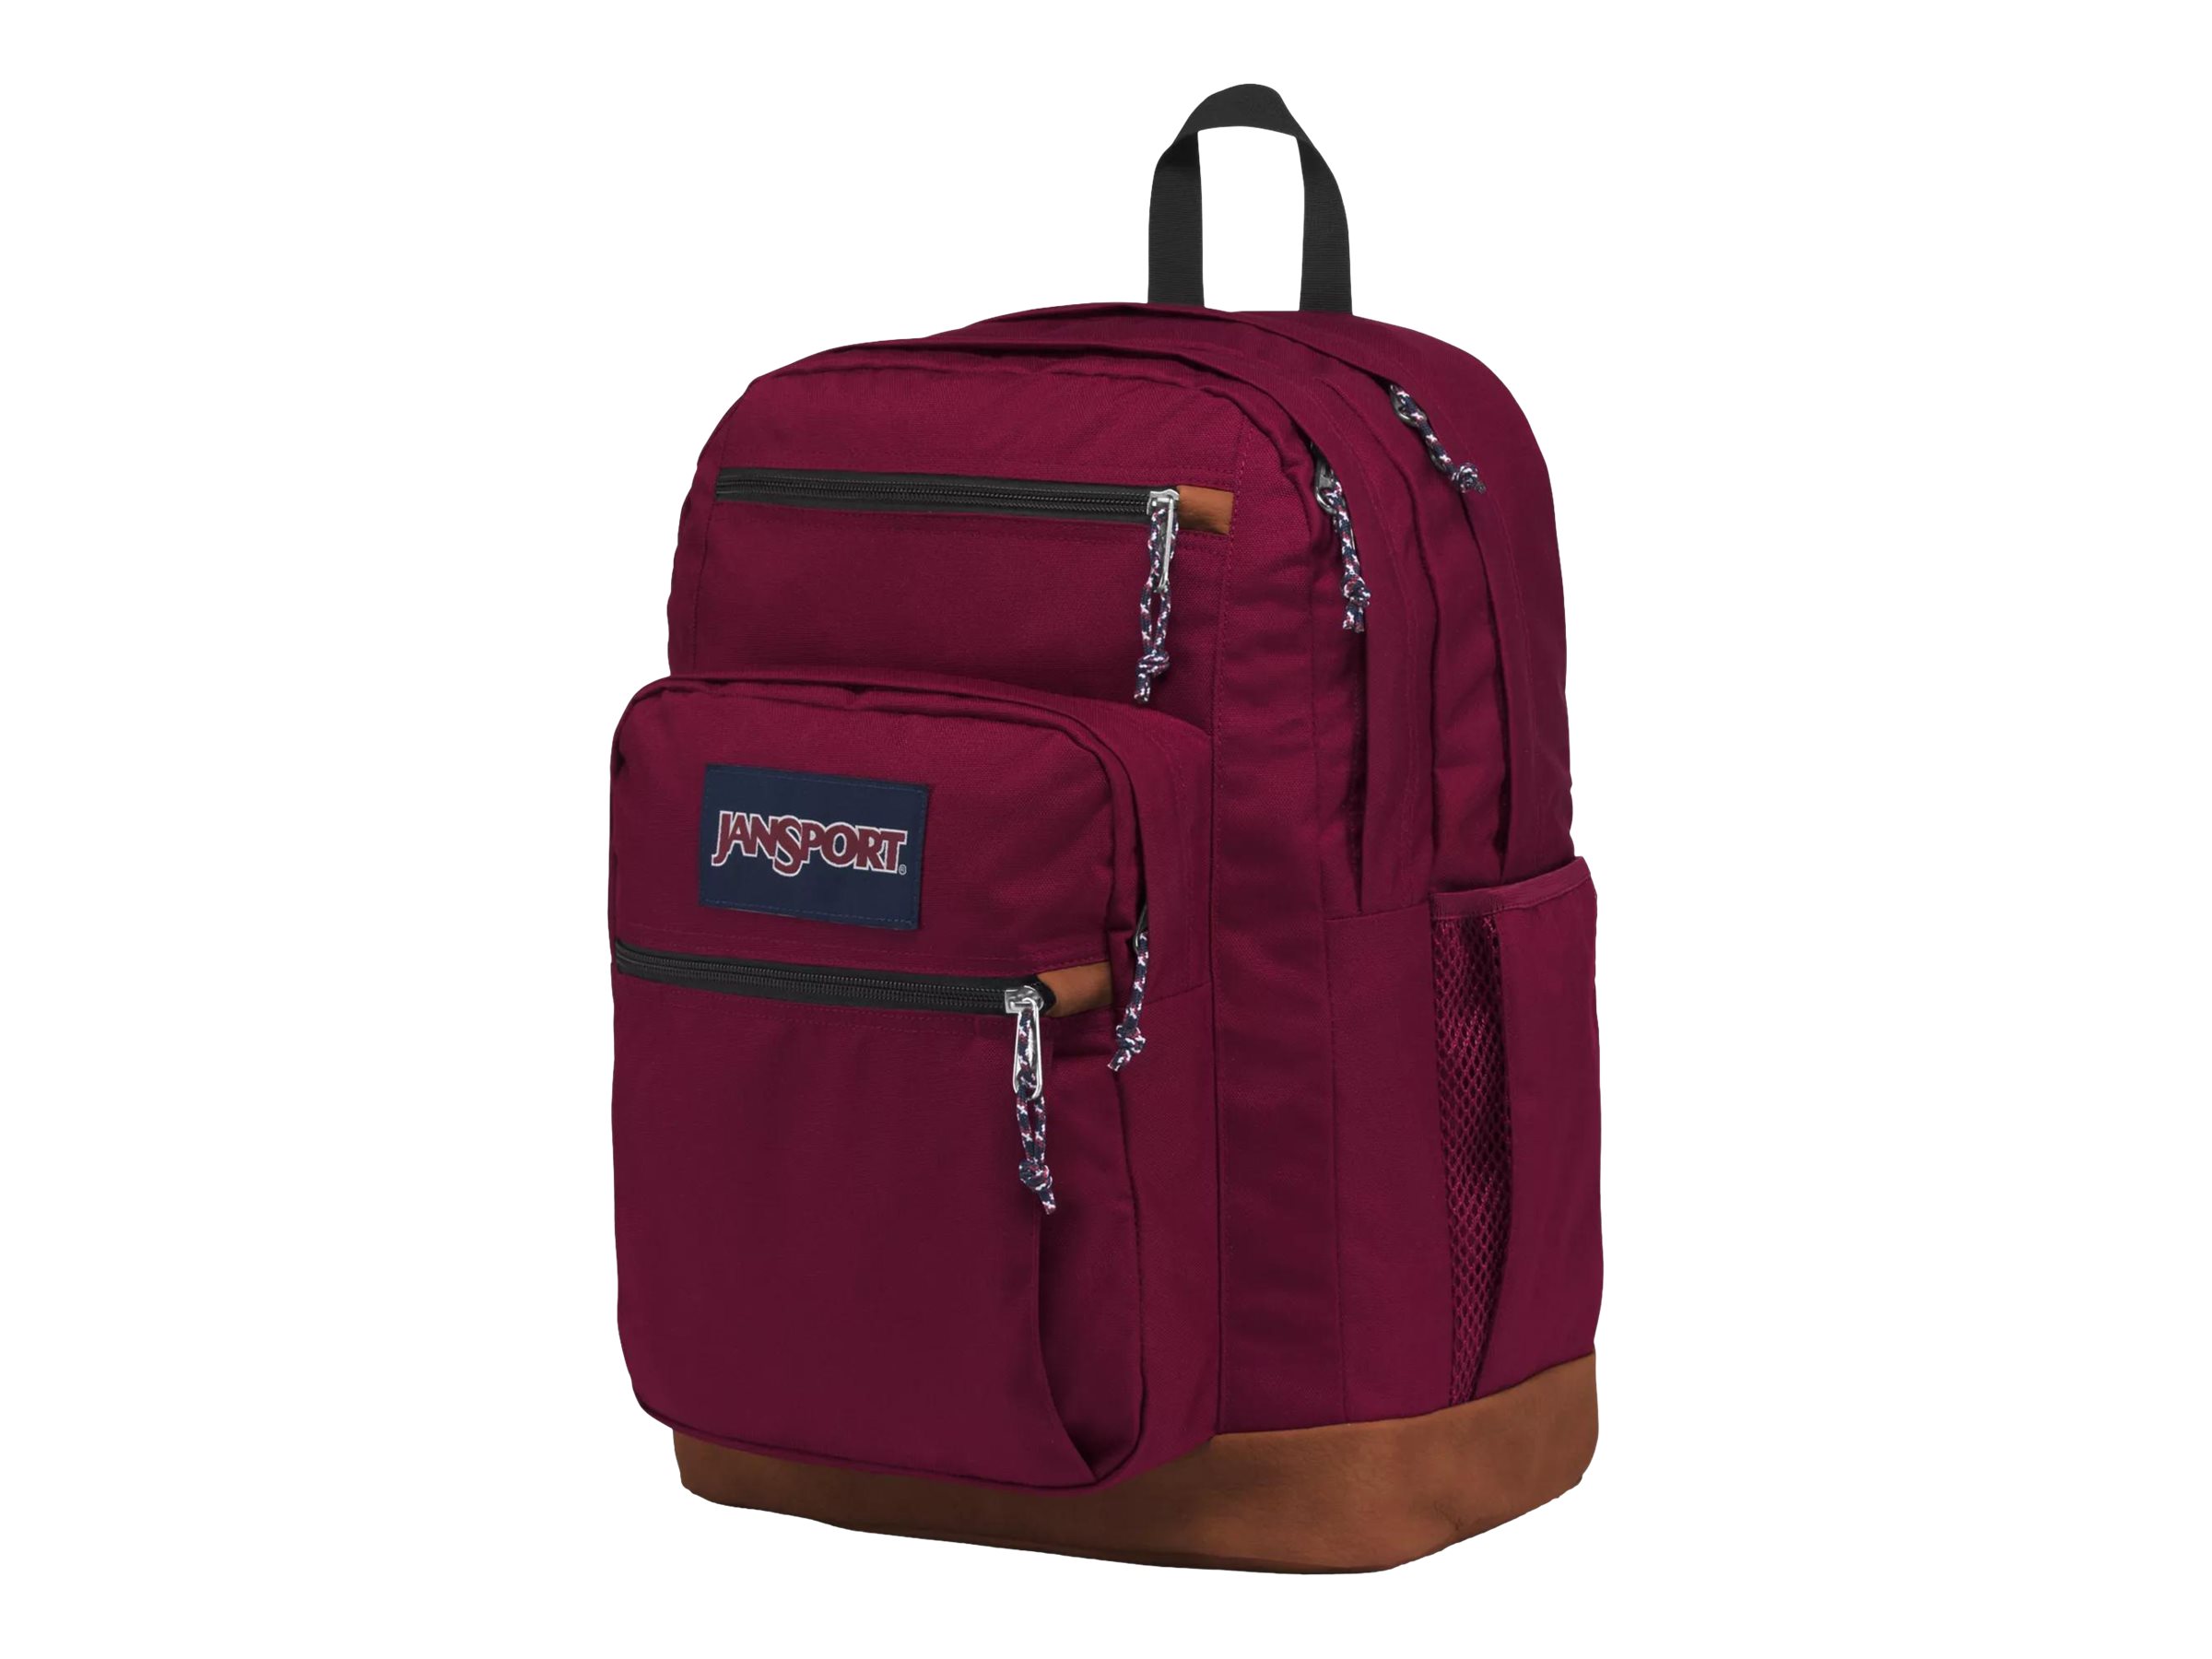 JanSport Cool Student - Notebook carrying backpack - 15" - russet red - image 1 of 4